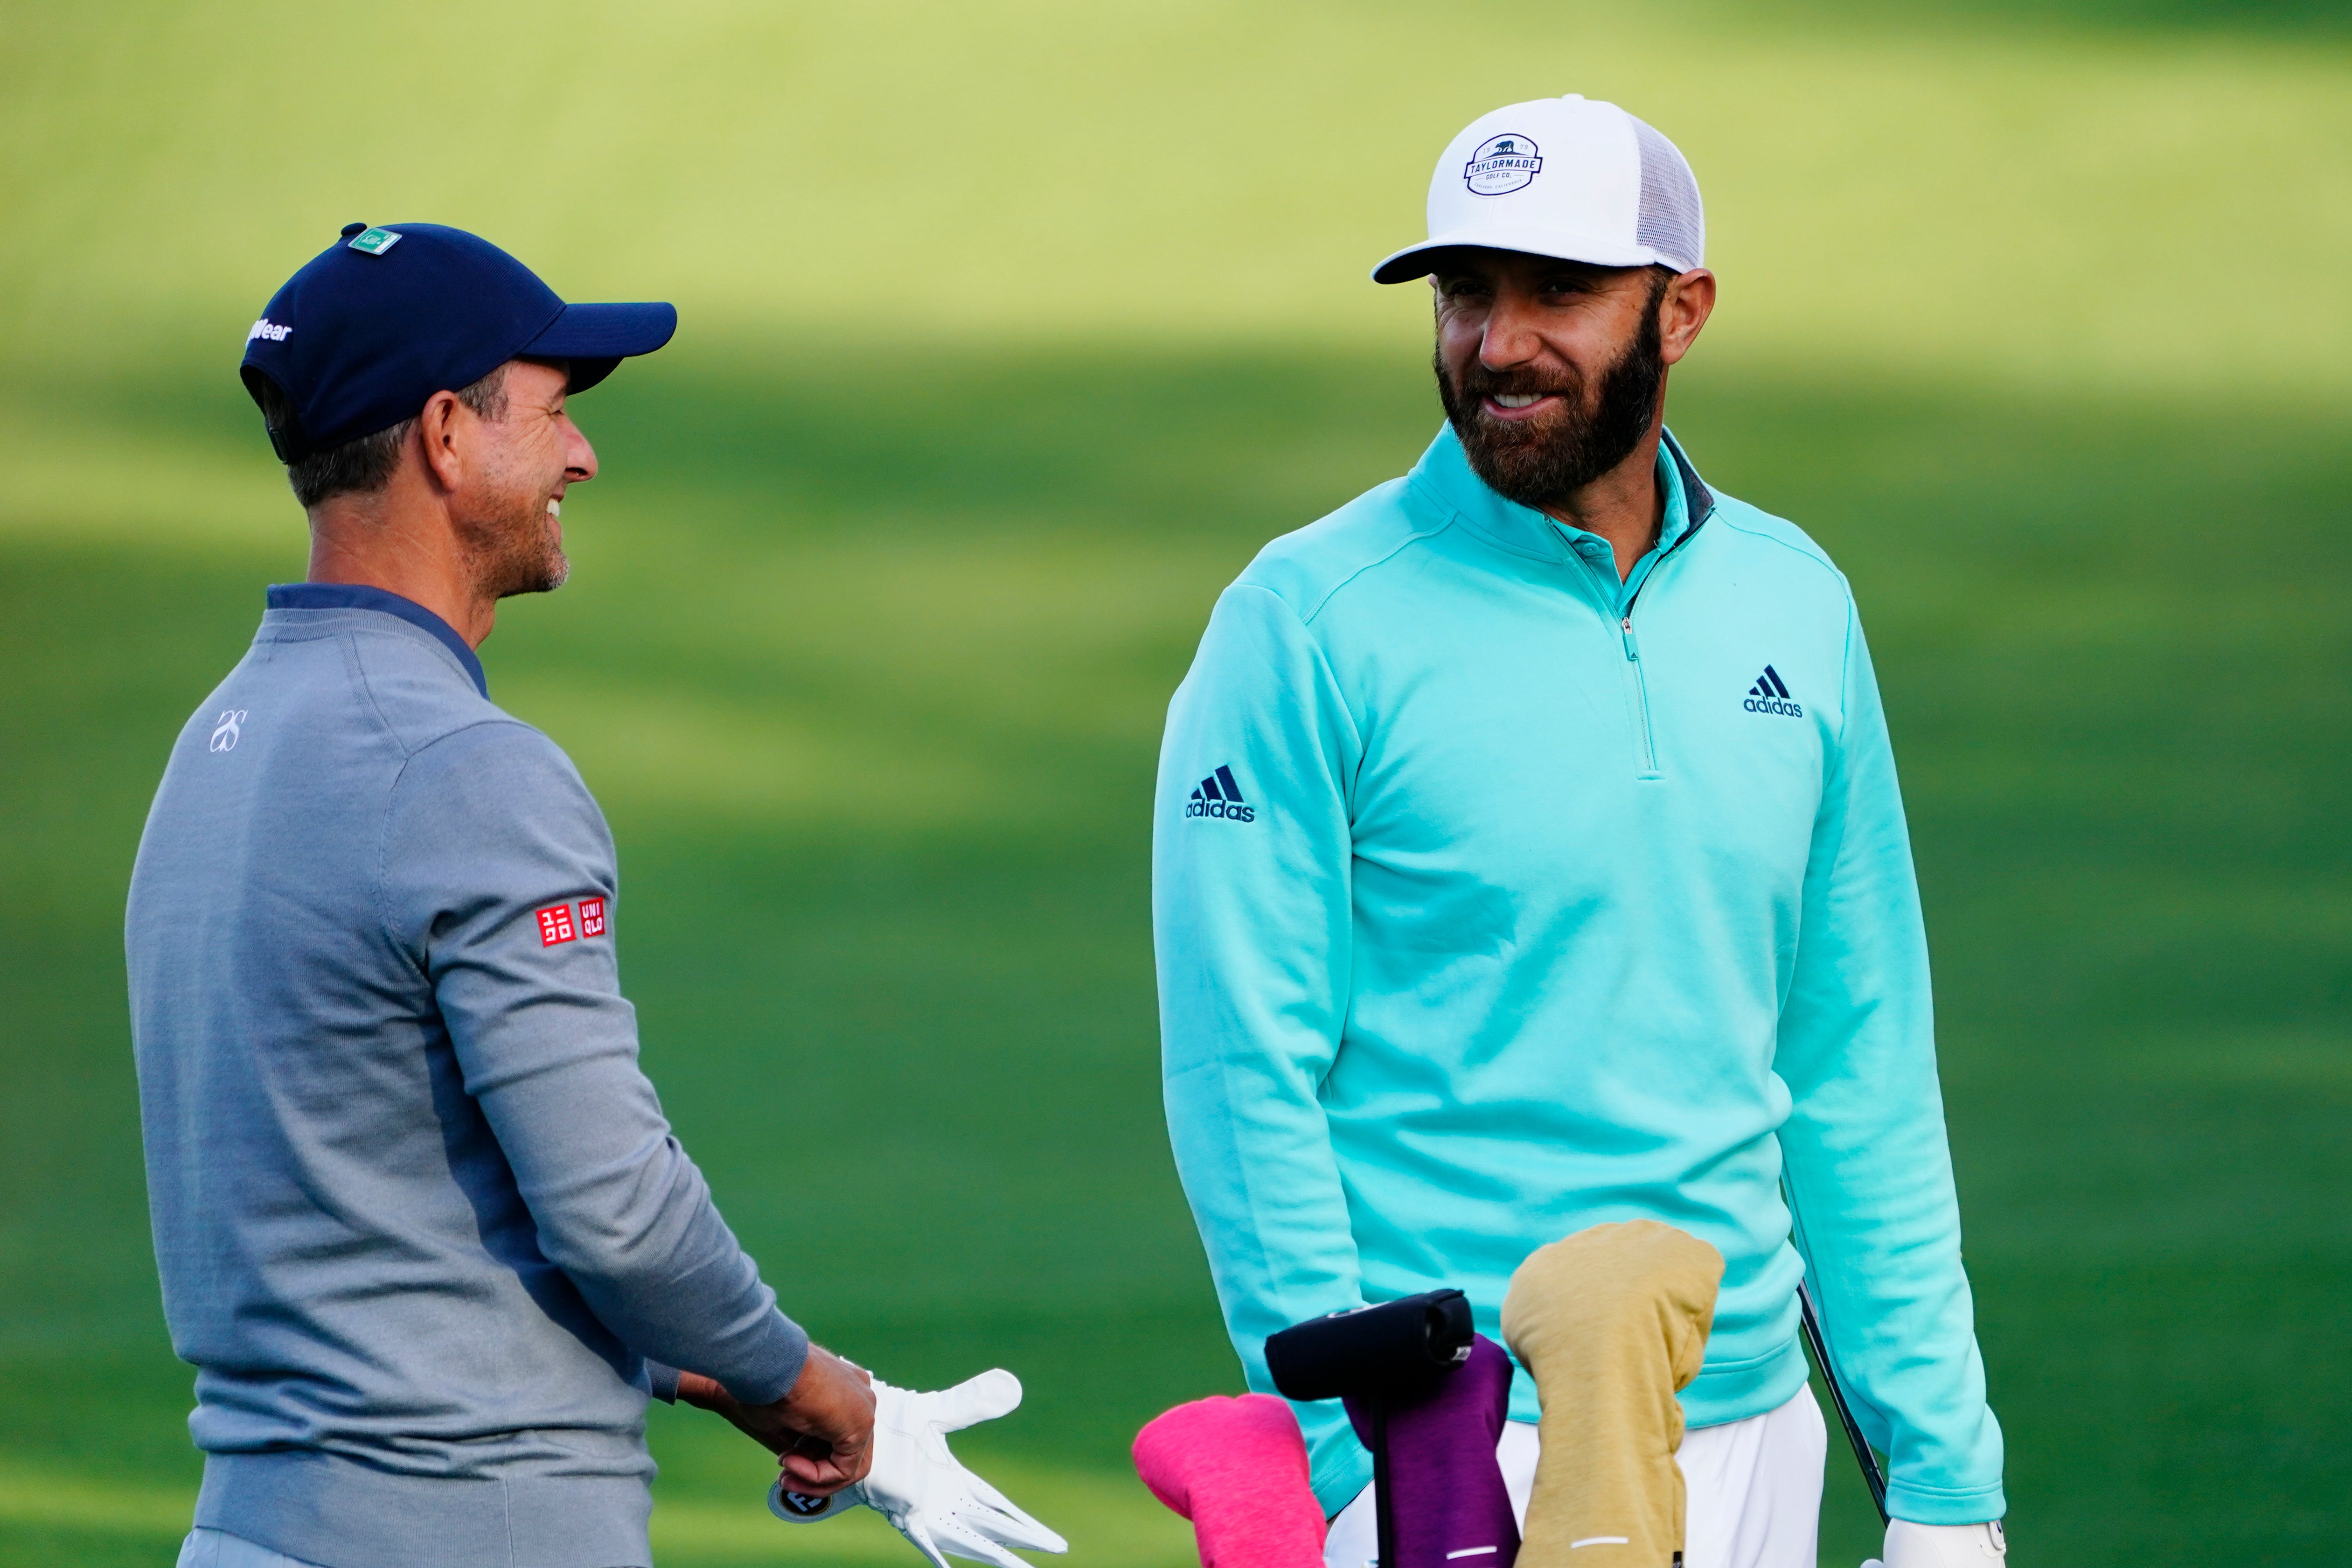 Adam Scott (left) and Dustin Johnson chat on the driving range during a practice round for the Masters (Matt Slocun/AP)